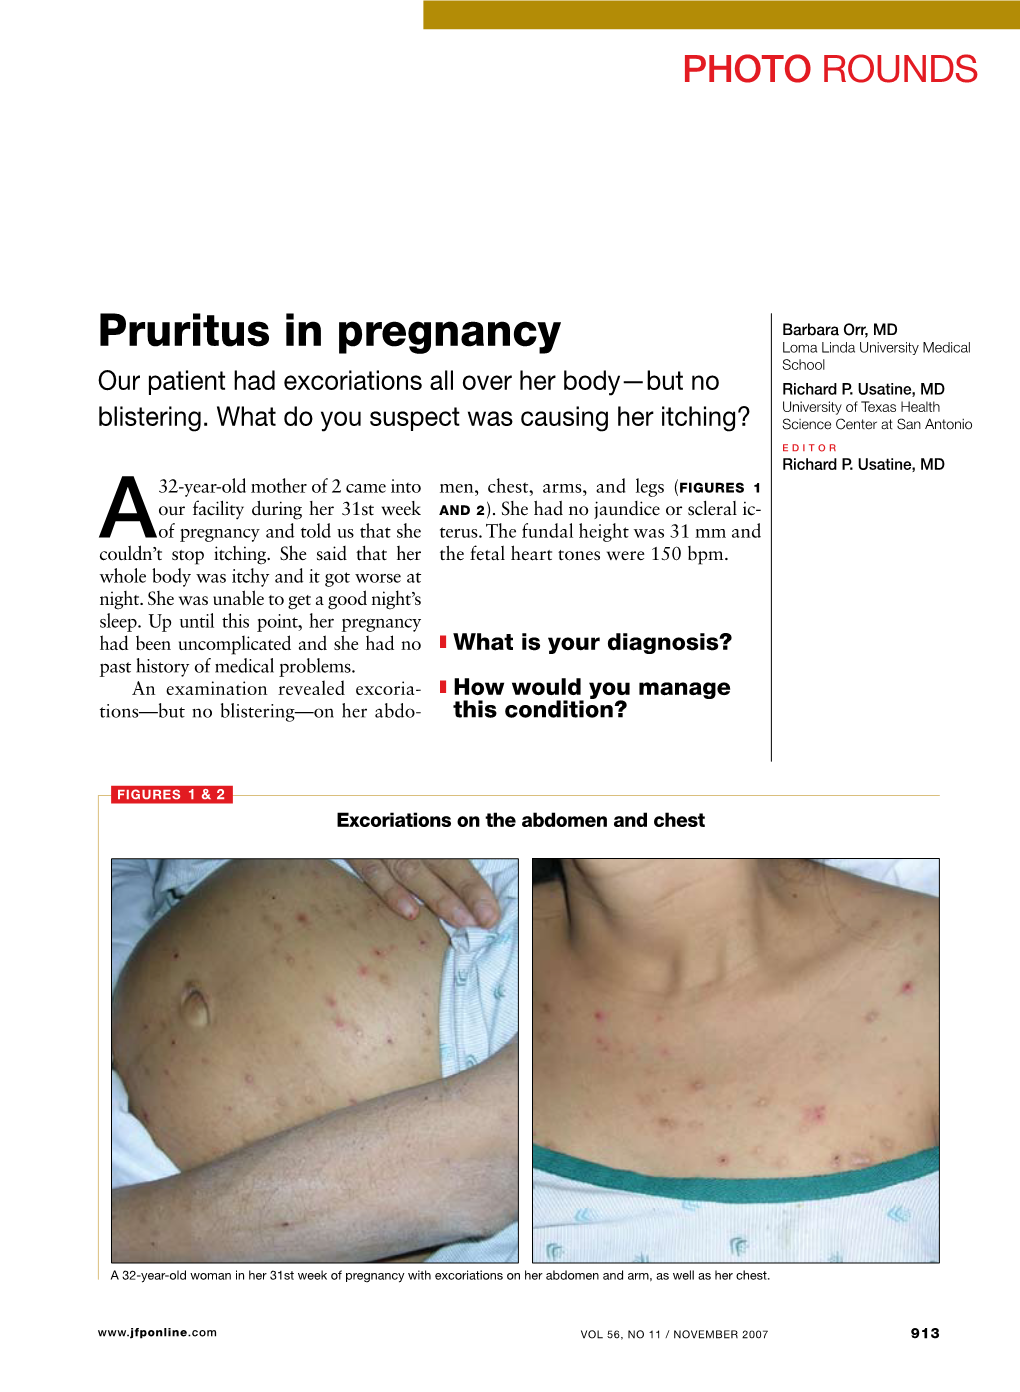 Pruritus in Pregnancy Loma Linda University Medical School Our Patient Had Excoriations All Over Her Body—But No Richard P